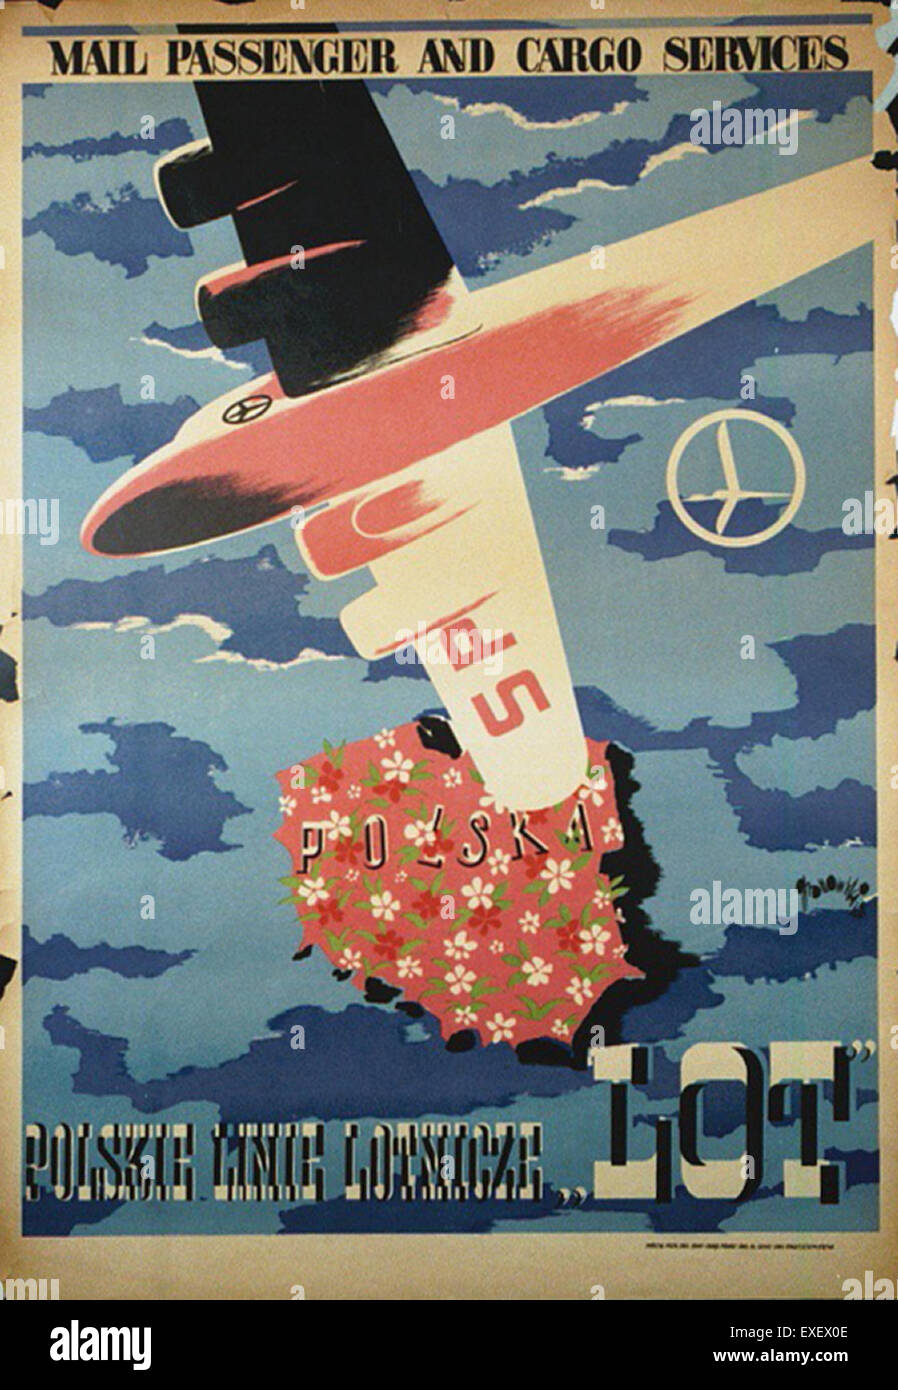 LOT Polish Airlines Poster Stock Photo